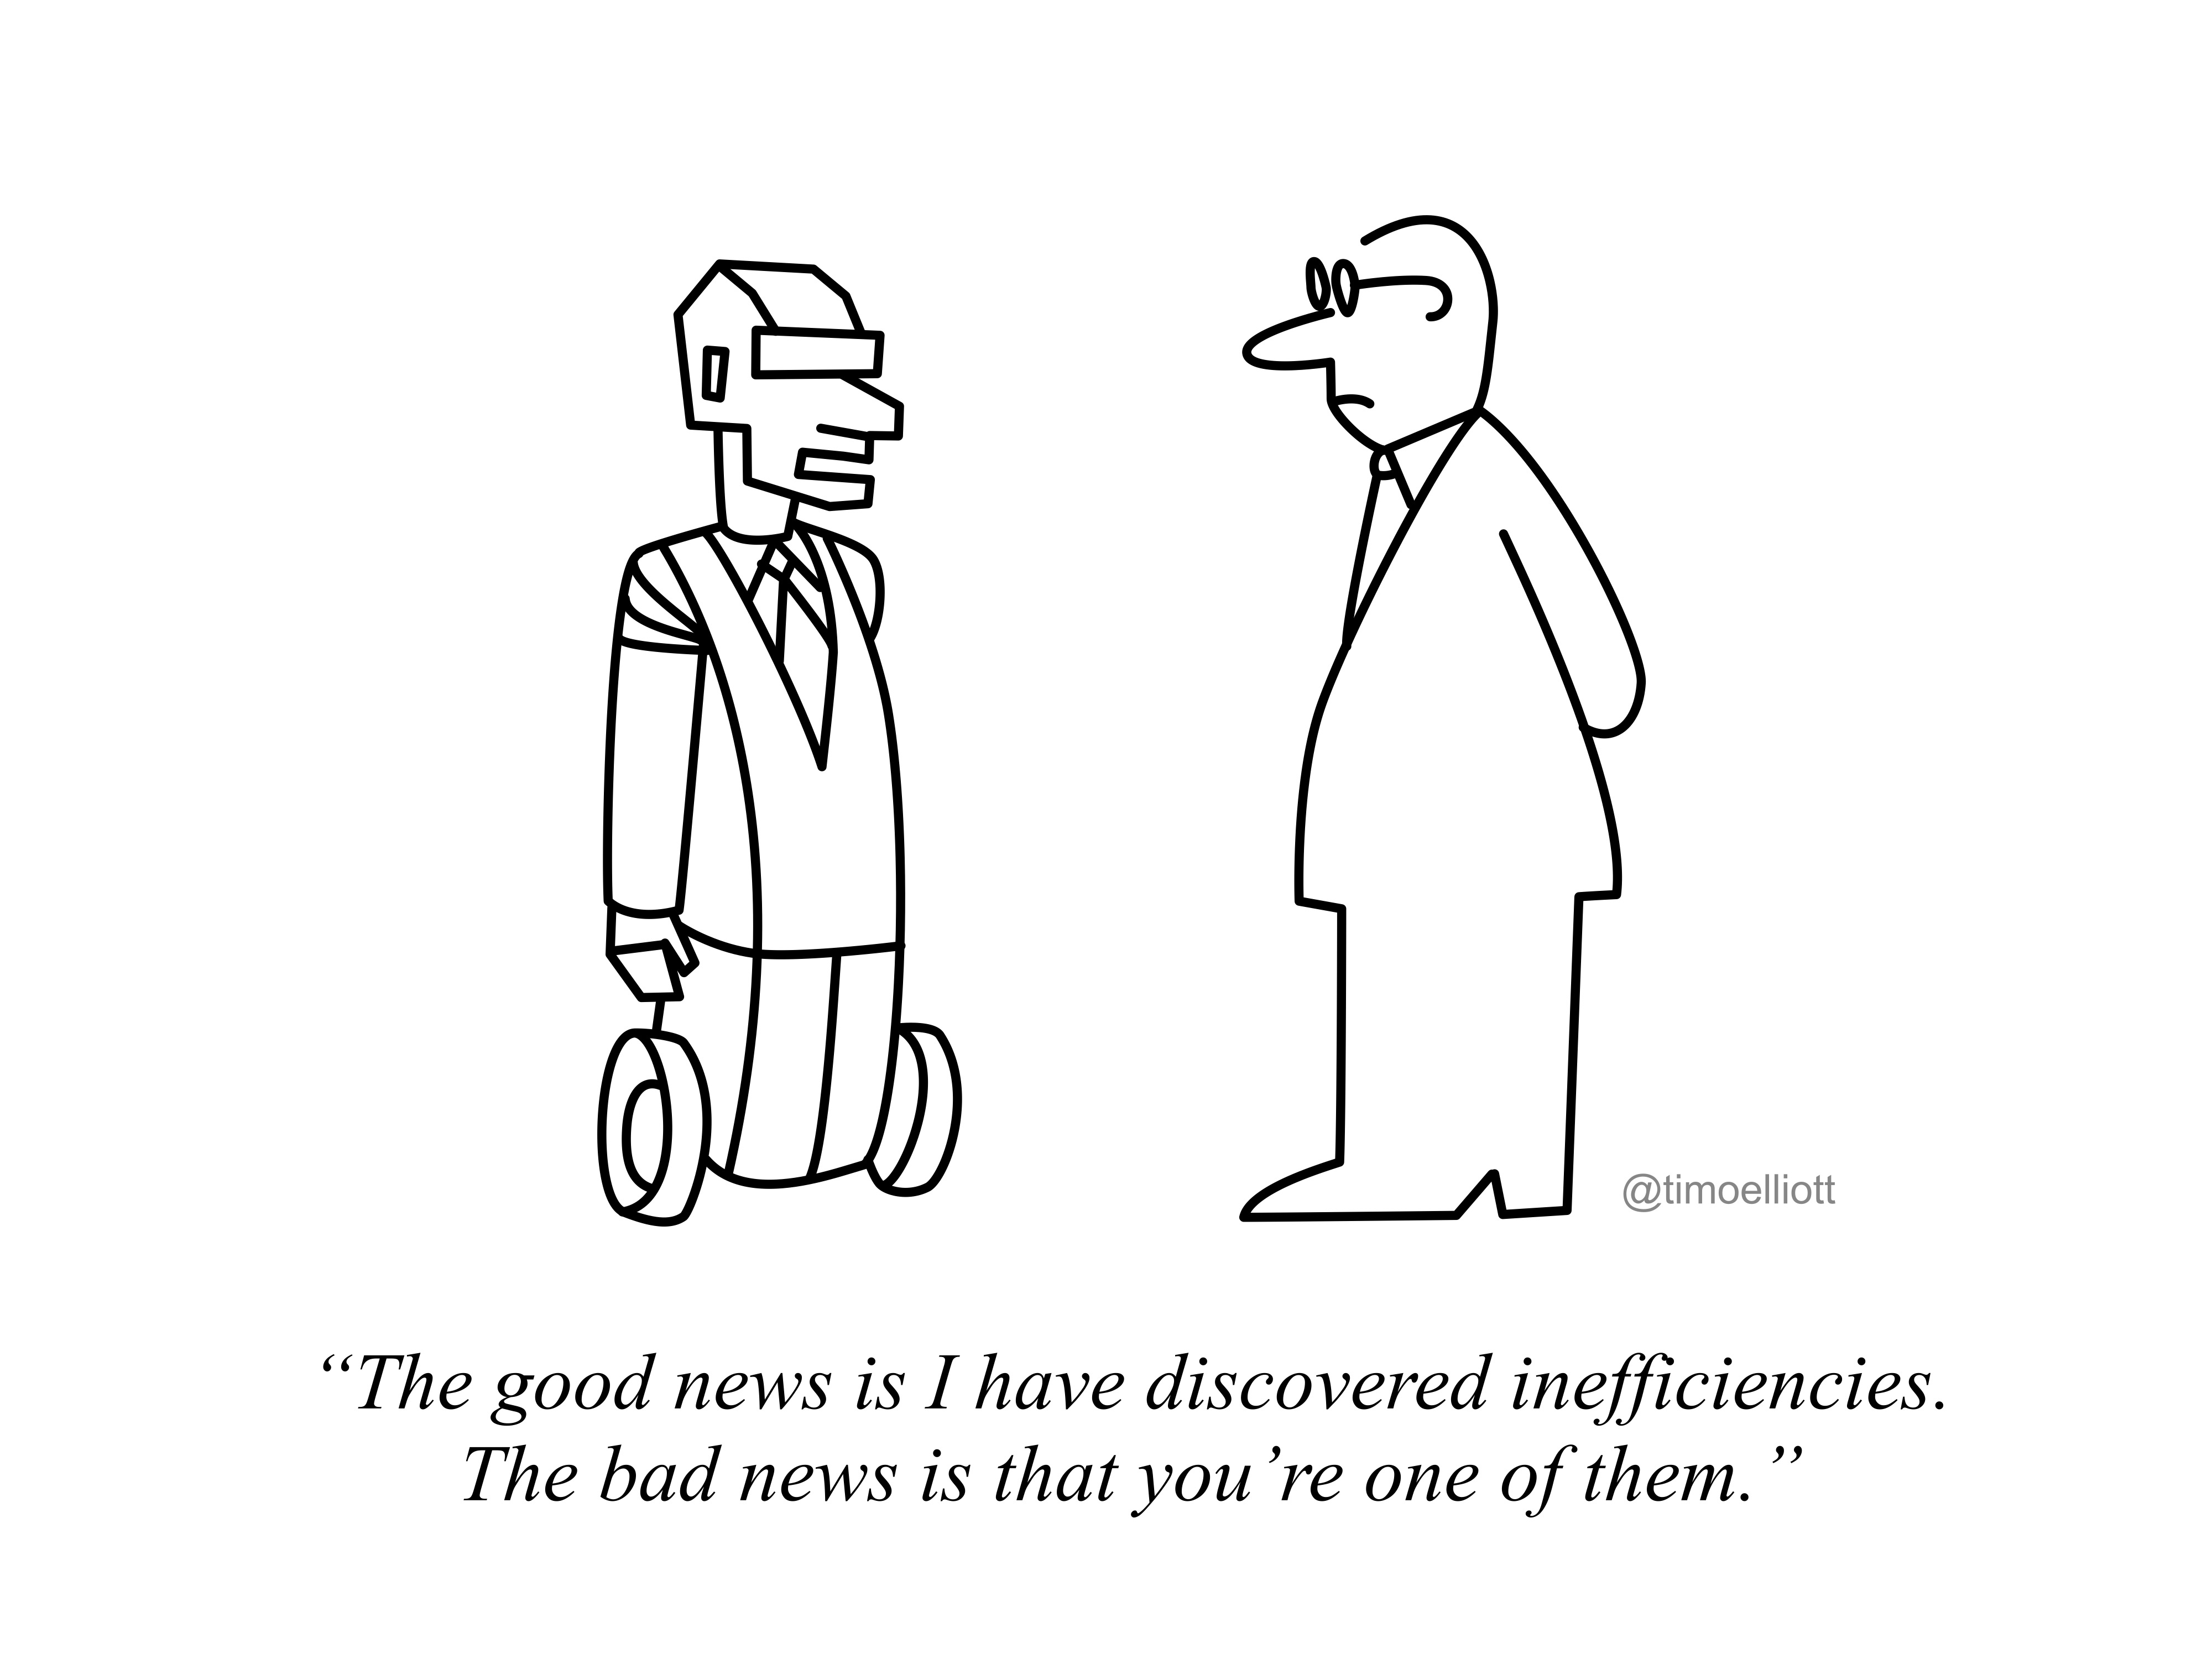 Artificial Intelligence: the Good News and the Bad News!